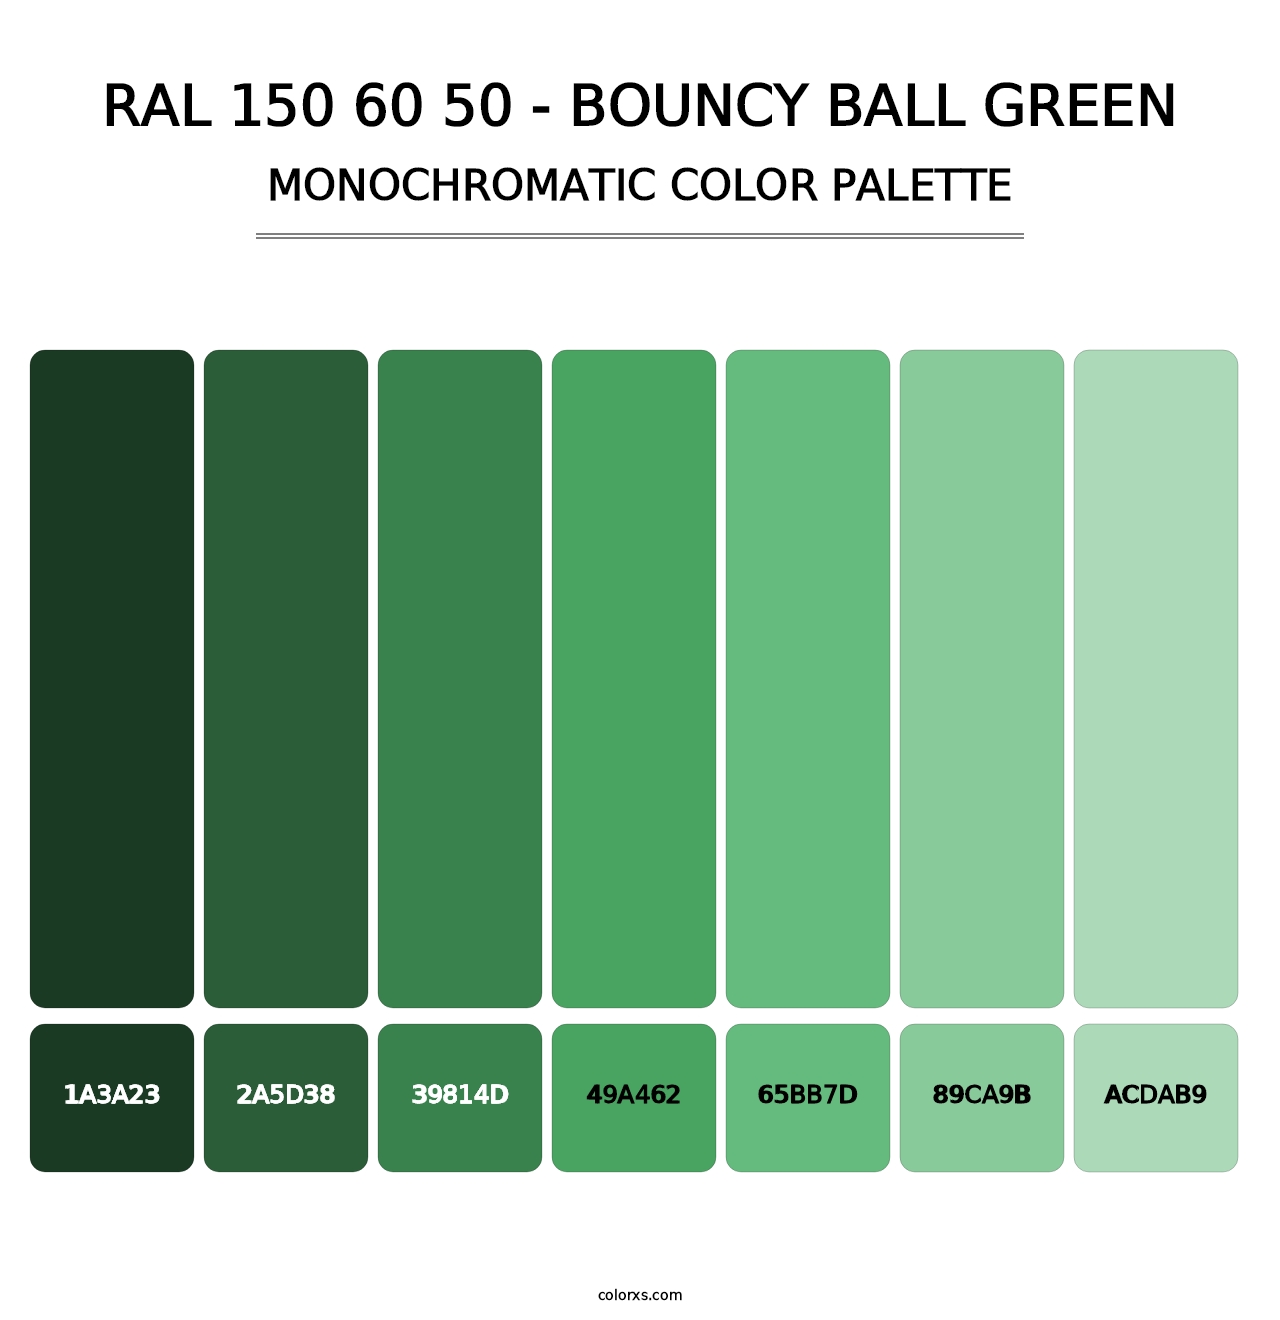 RAL 150 60 50 - Bouncy Ball Green - Monochromatic Color Palette